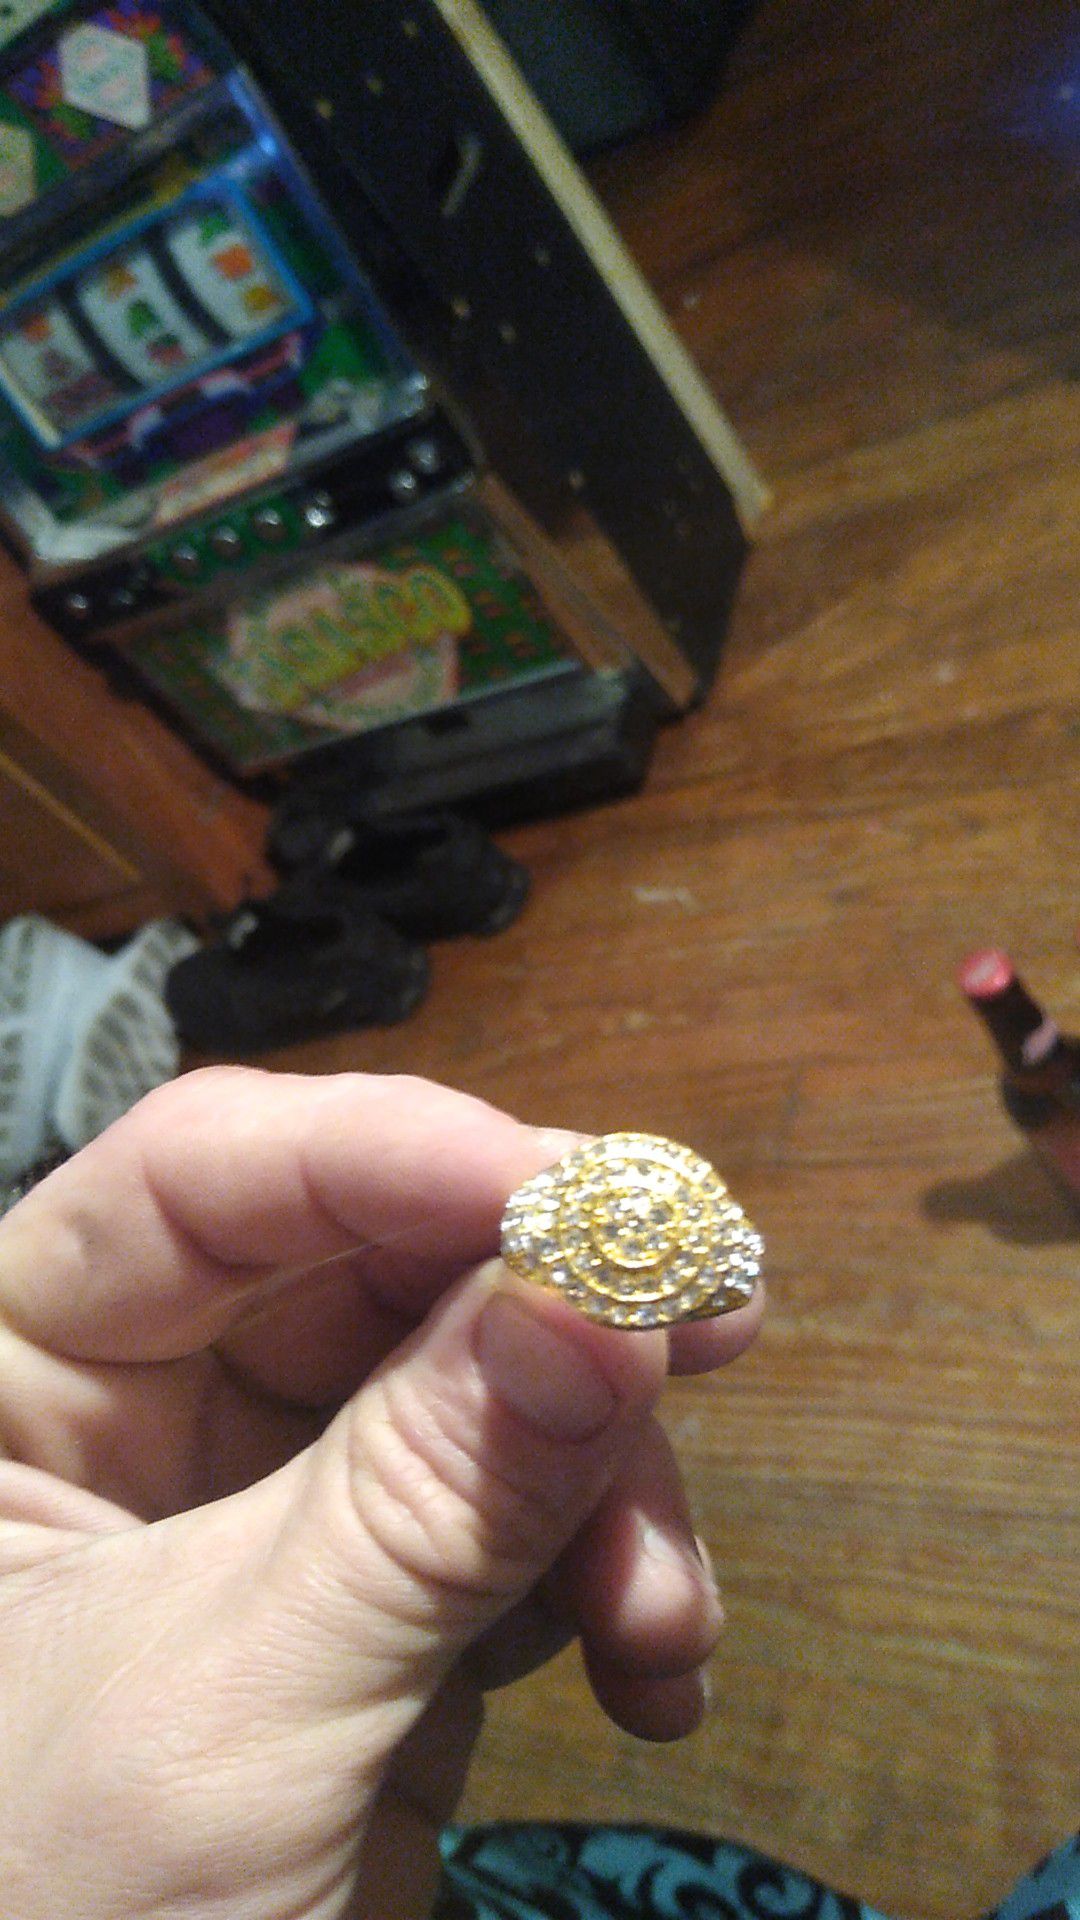 Ring size 9 I believe not real but looks legit